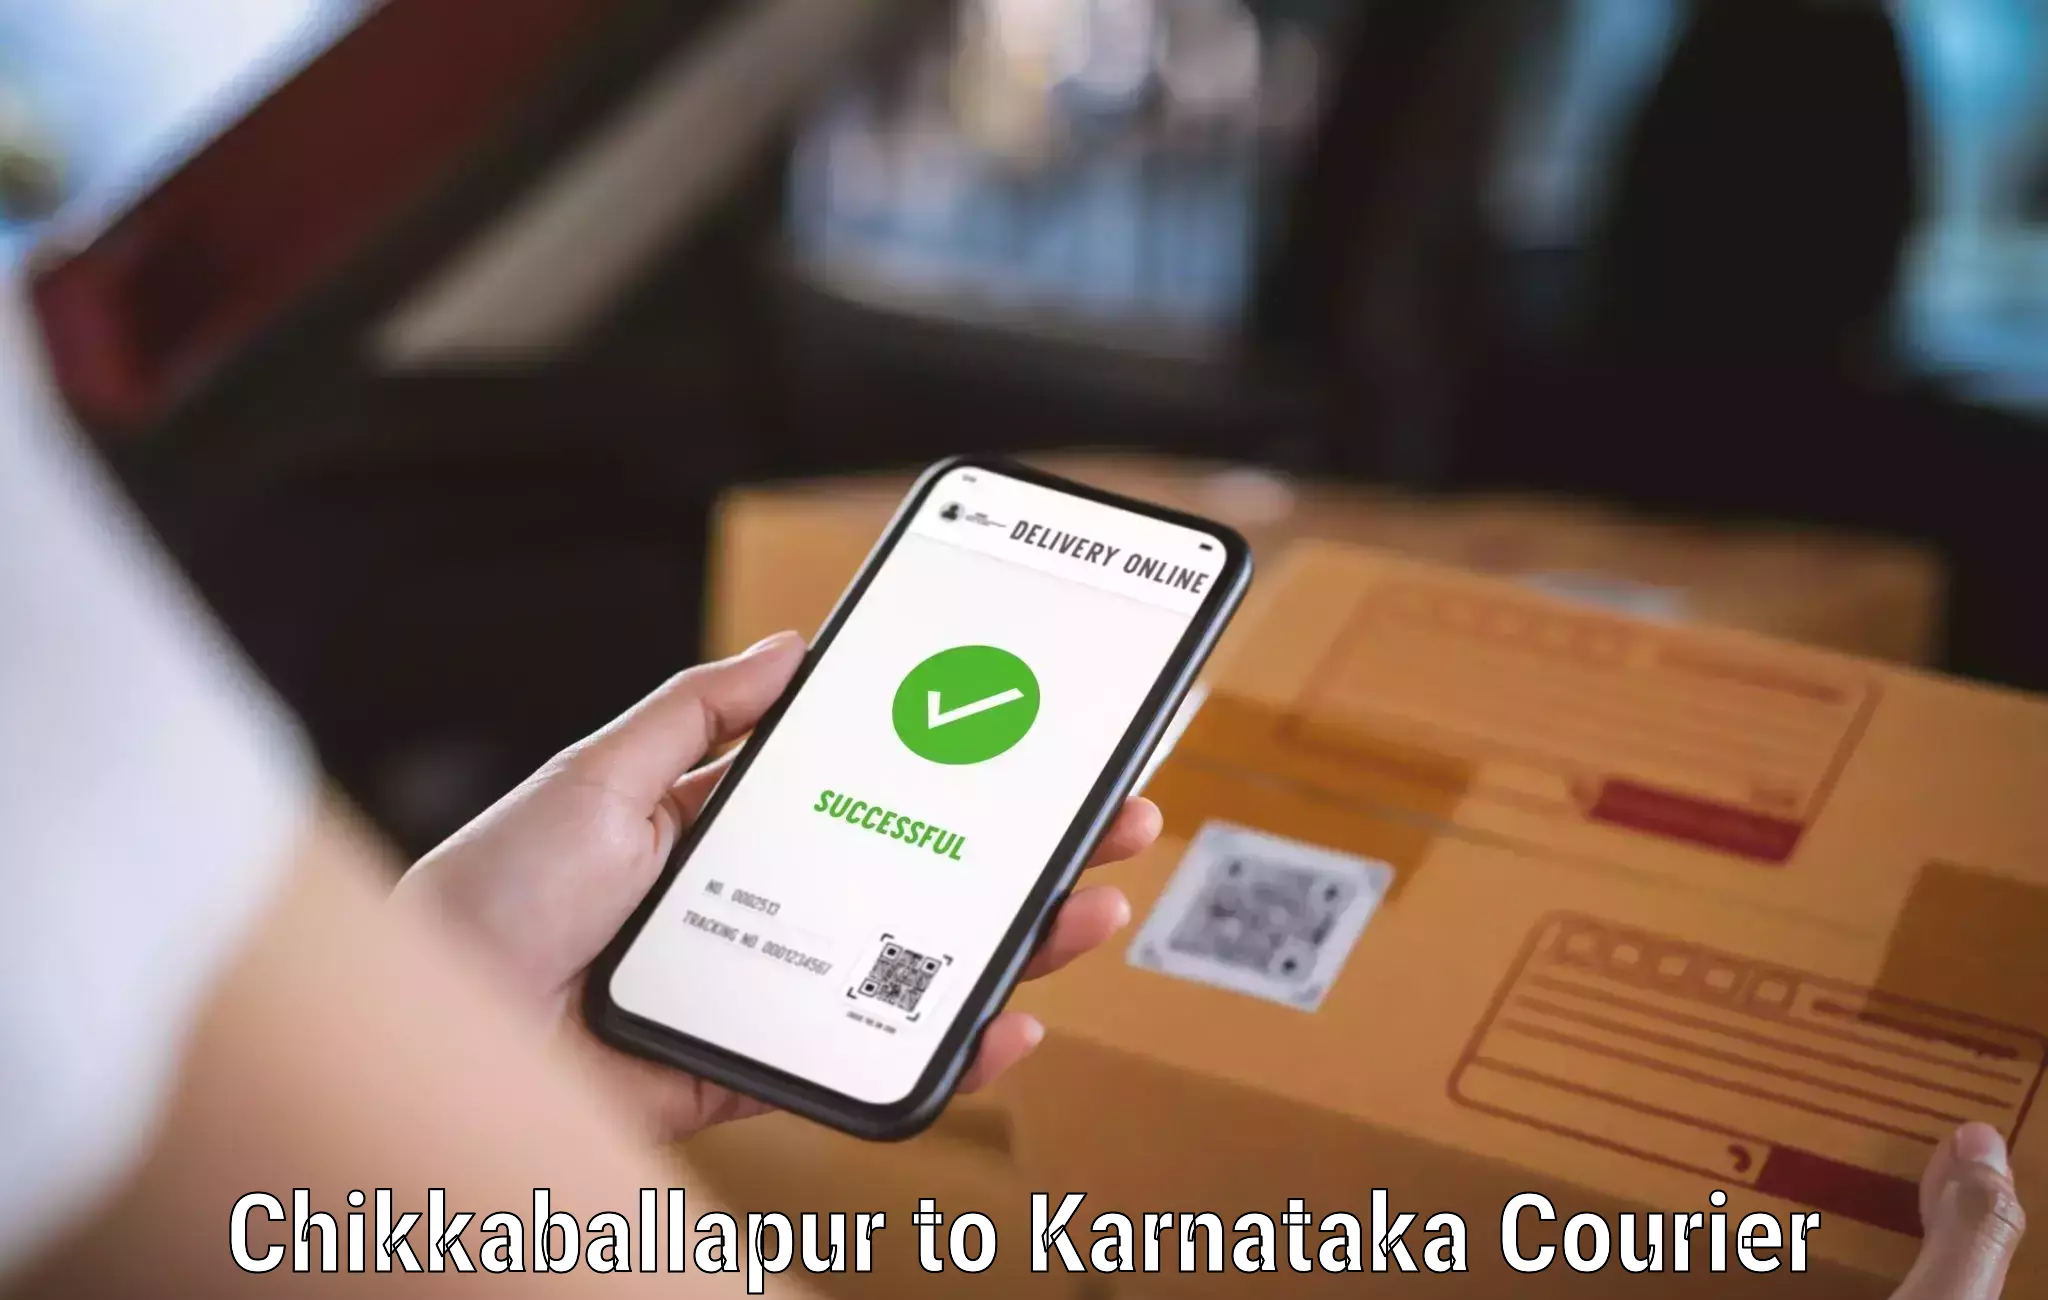 Courier service booking Chikkaballapur to Mangalore Port